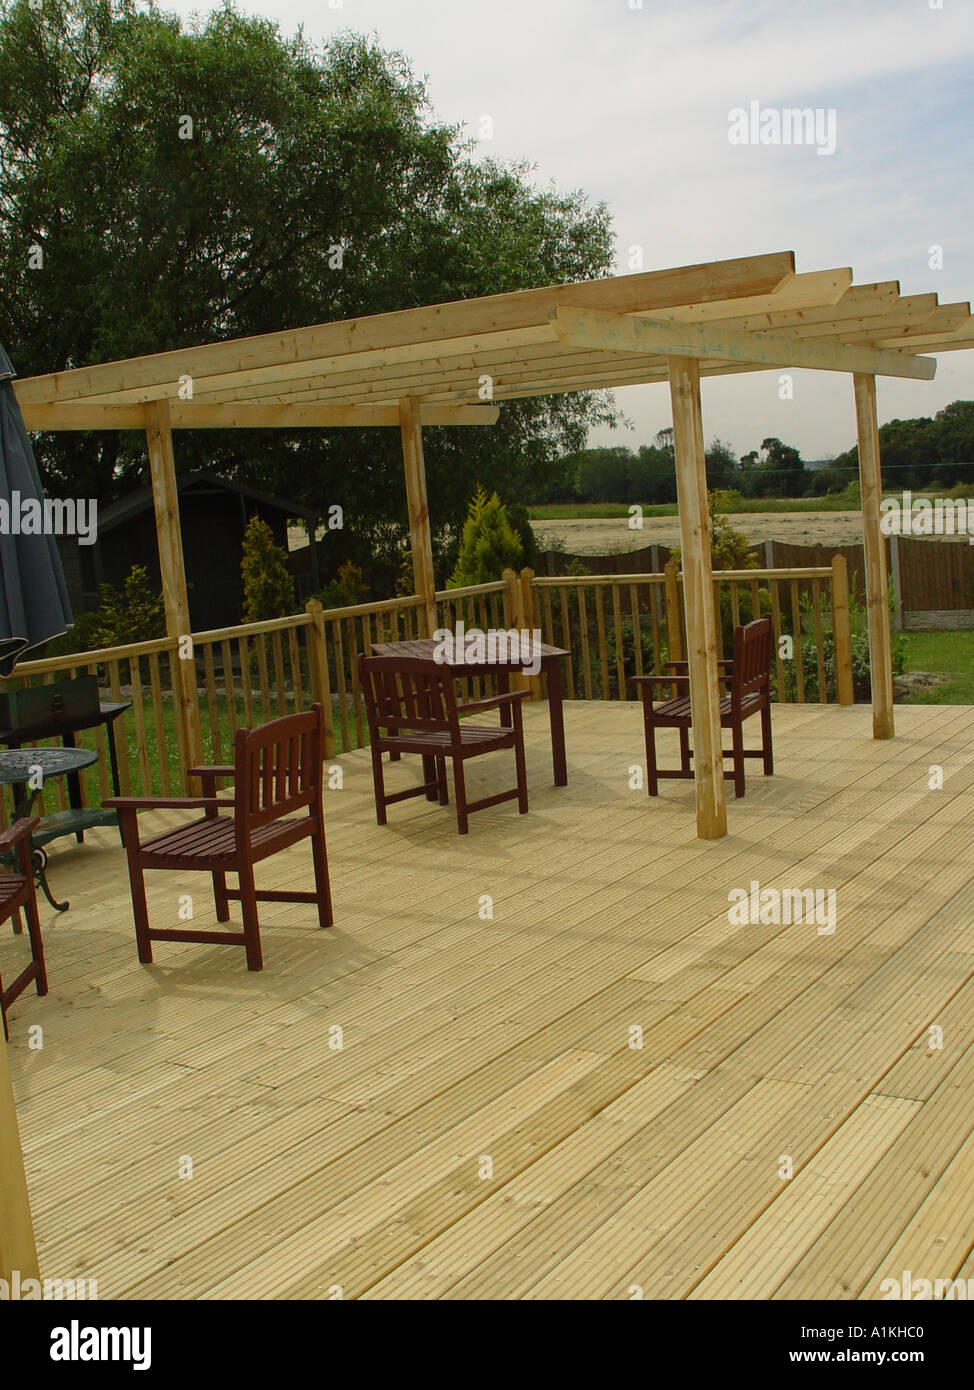 Pergola over garden patio deck the decking and pergola are constructed from tanalised timber for long life Stock Photo